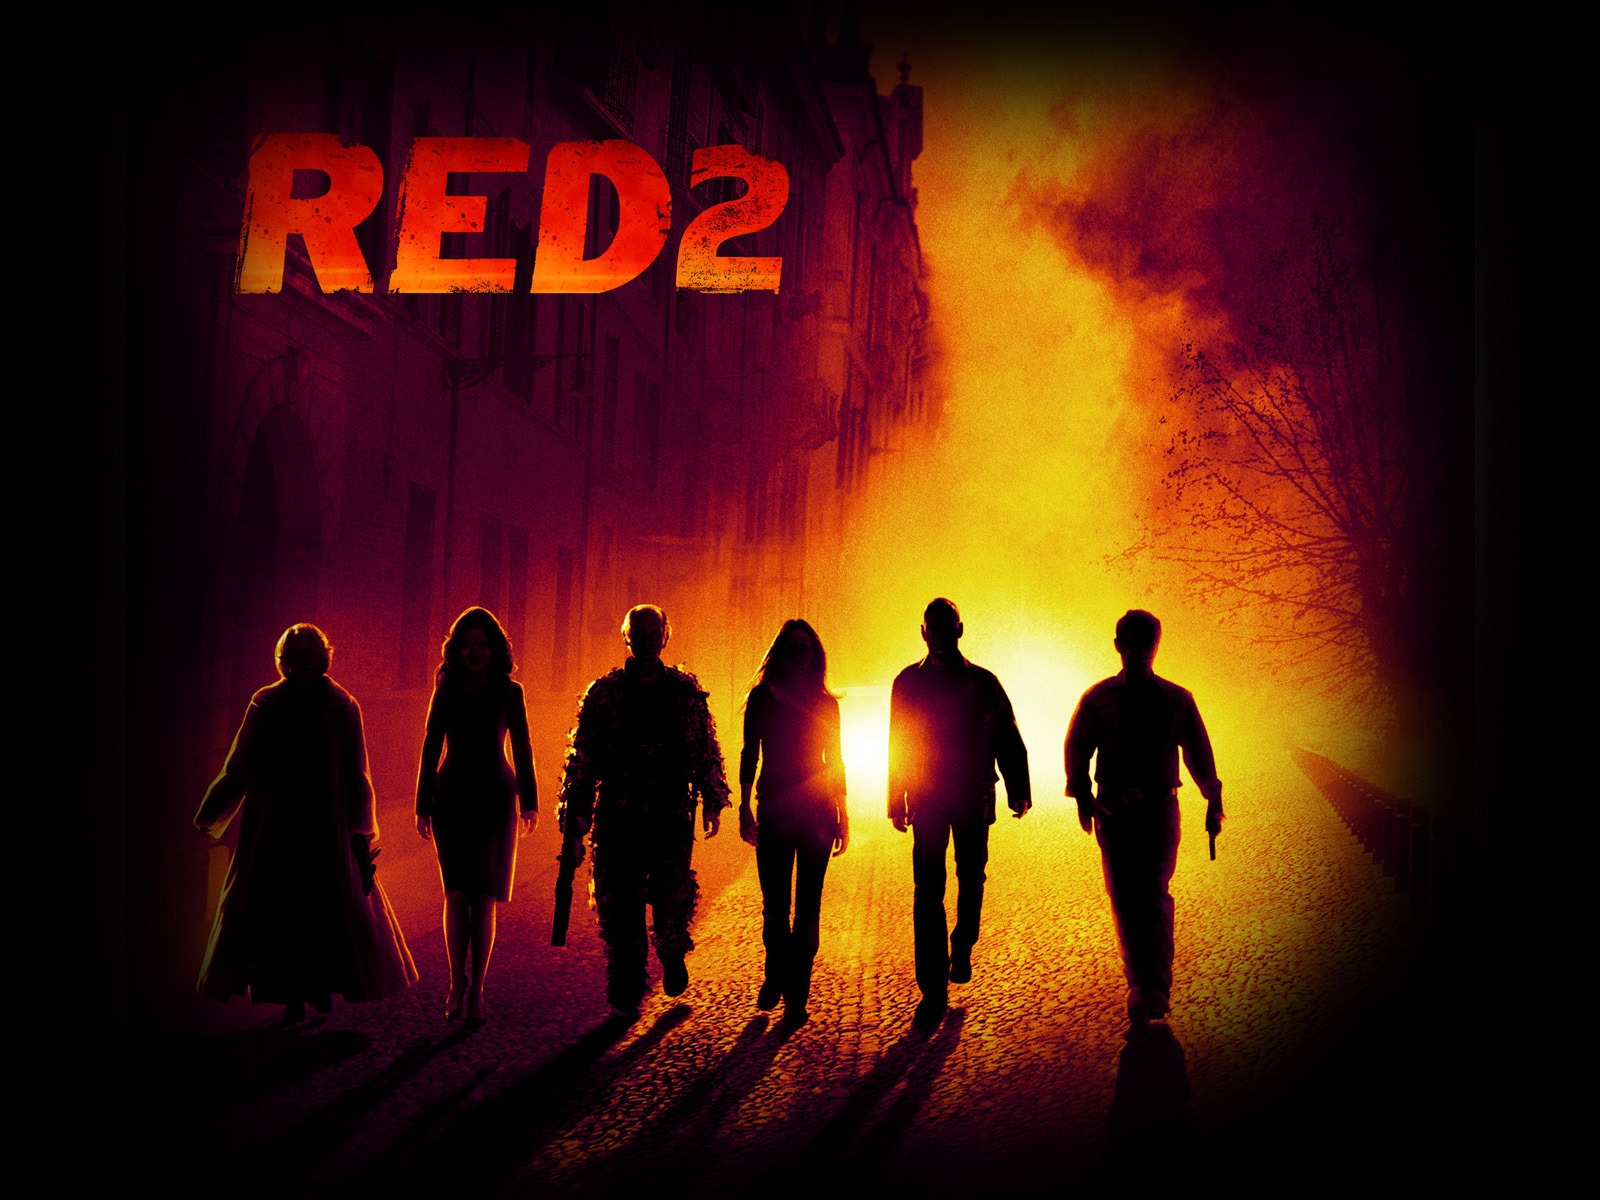 2013 RED 2 for 1600 x 1200 resolution